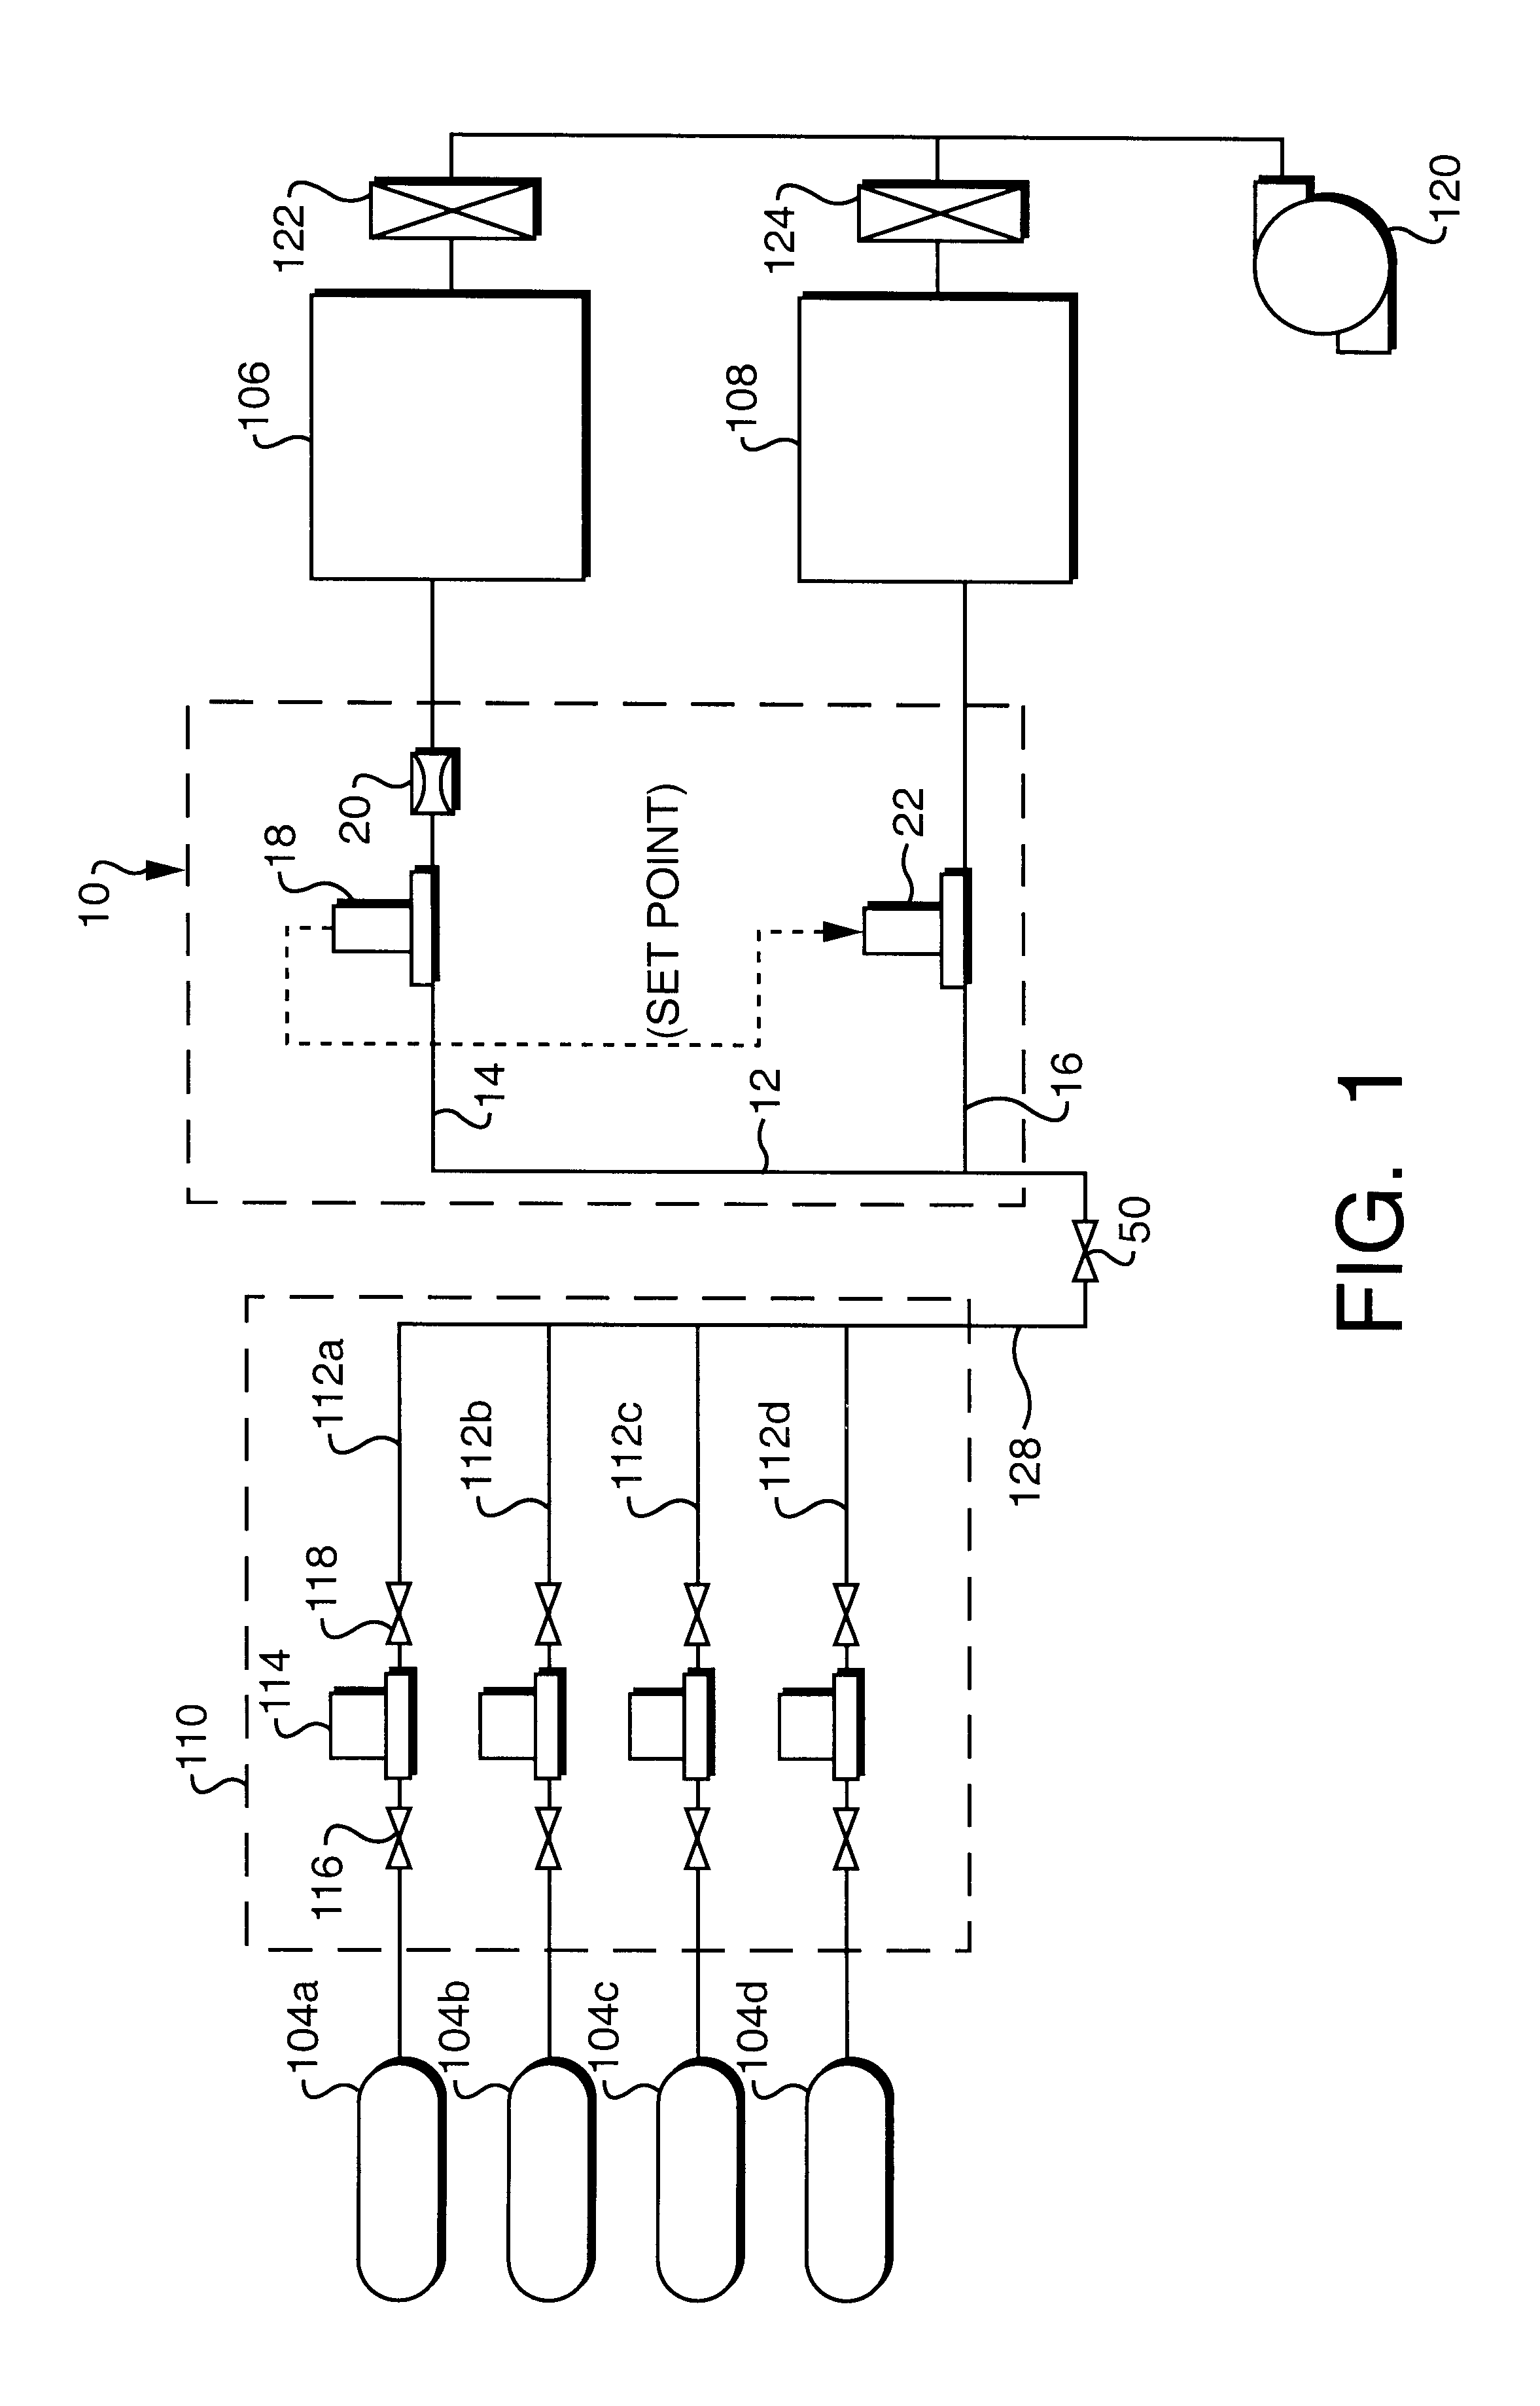 System and method for dividing flow